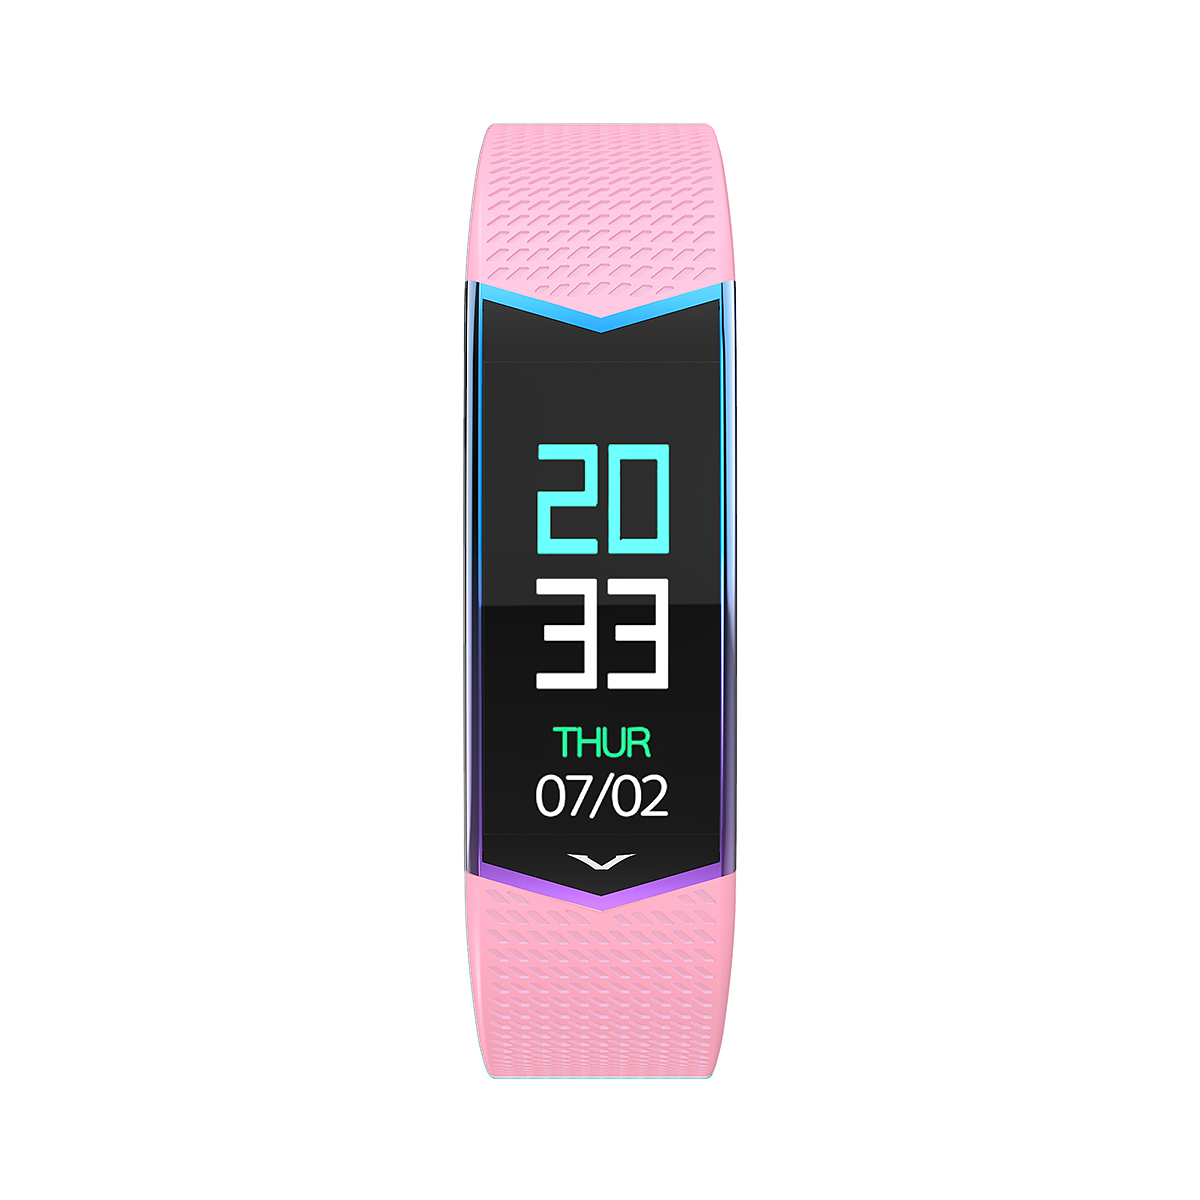 Find Bakeey Color Display 24 hour Continuous Heart Rate Blood Pressure WhatsApp Reminder Long Standby Smart Watch Band for Sale on Gipsybee.com with cryptocurrencies